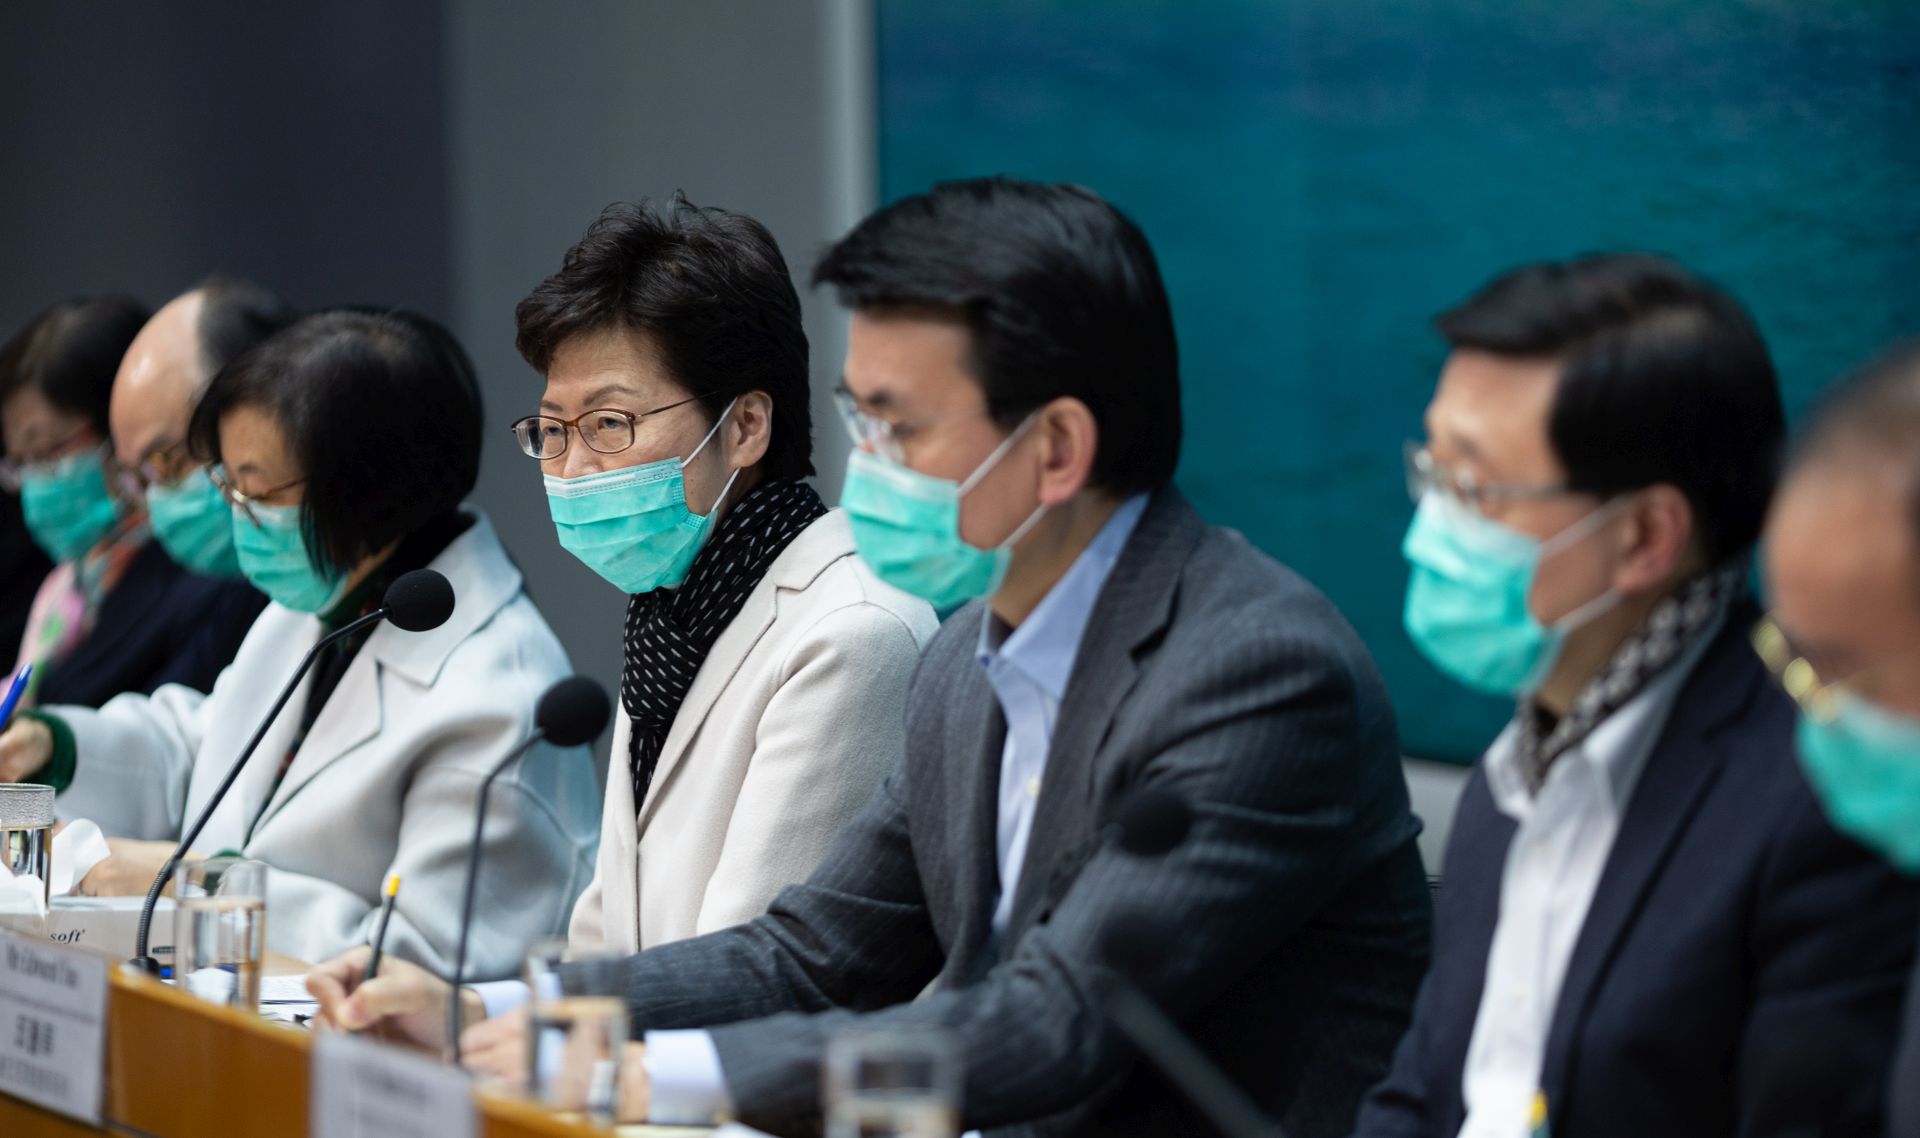 epa08171989 Hong Kong Chief Executive Carrie Lam (C) and cabinet members attend a press conference about the coronavirus outbreak, in Hong Kong, China, 28 January 2020. Lam announced that all rail and ferry routes between mainland China and Hong Kong will be halted starting at midnight on 30 January, but stopped short of a full border closure. The coronavirus has so far killed at least 106 people and infected over four thousand others around the globe, mostly in China.  EPA/JEROME FAVRE